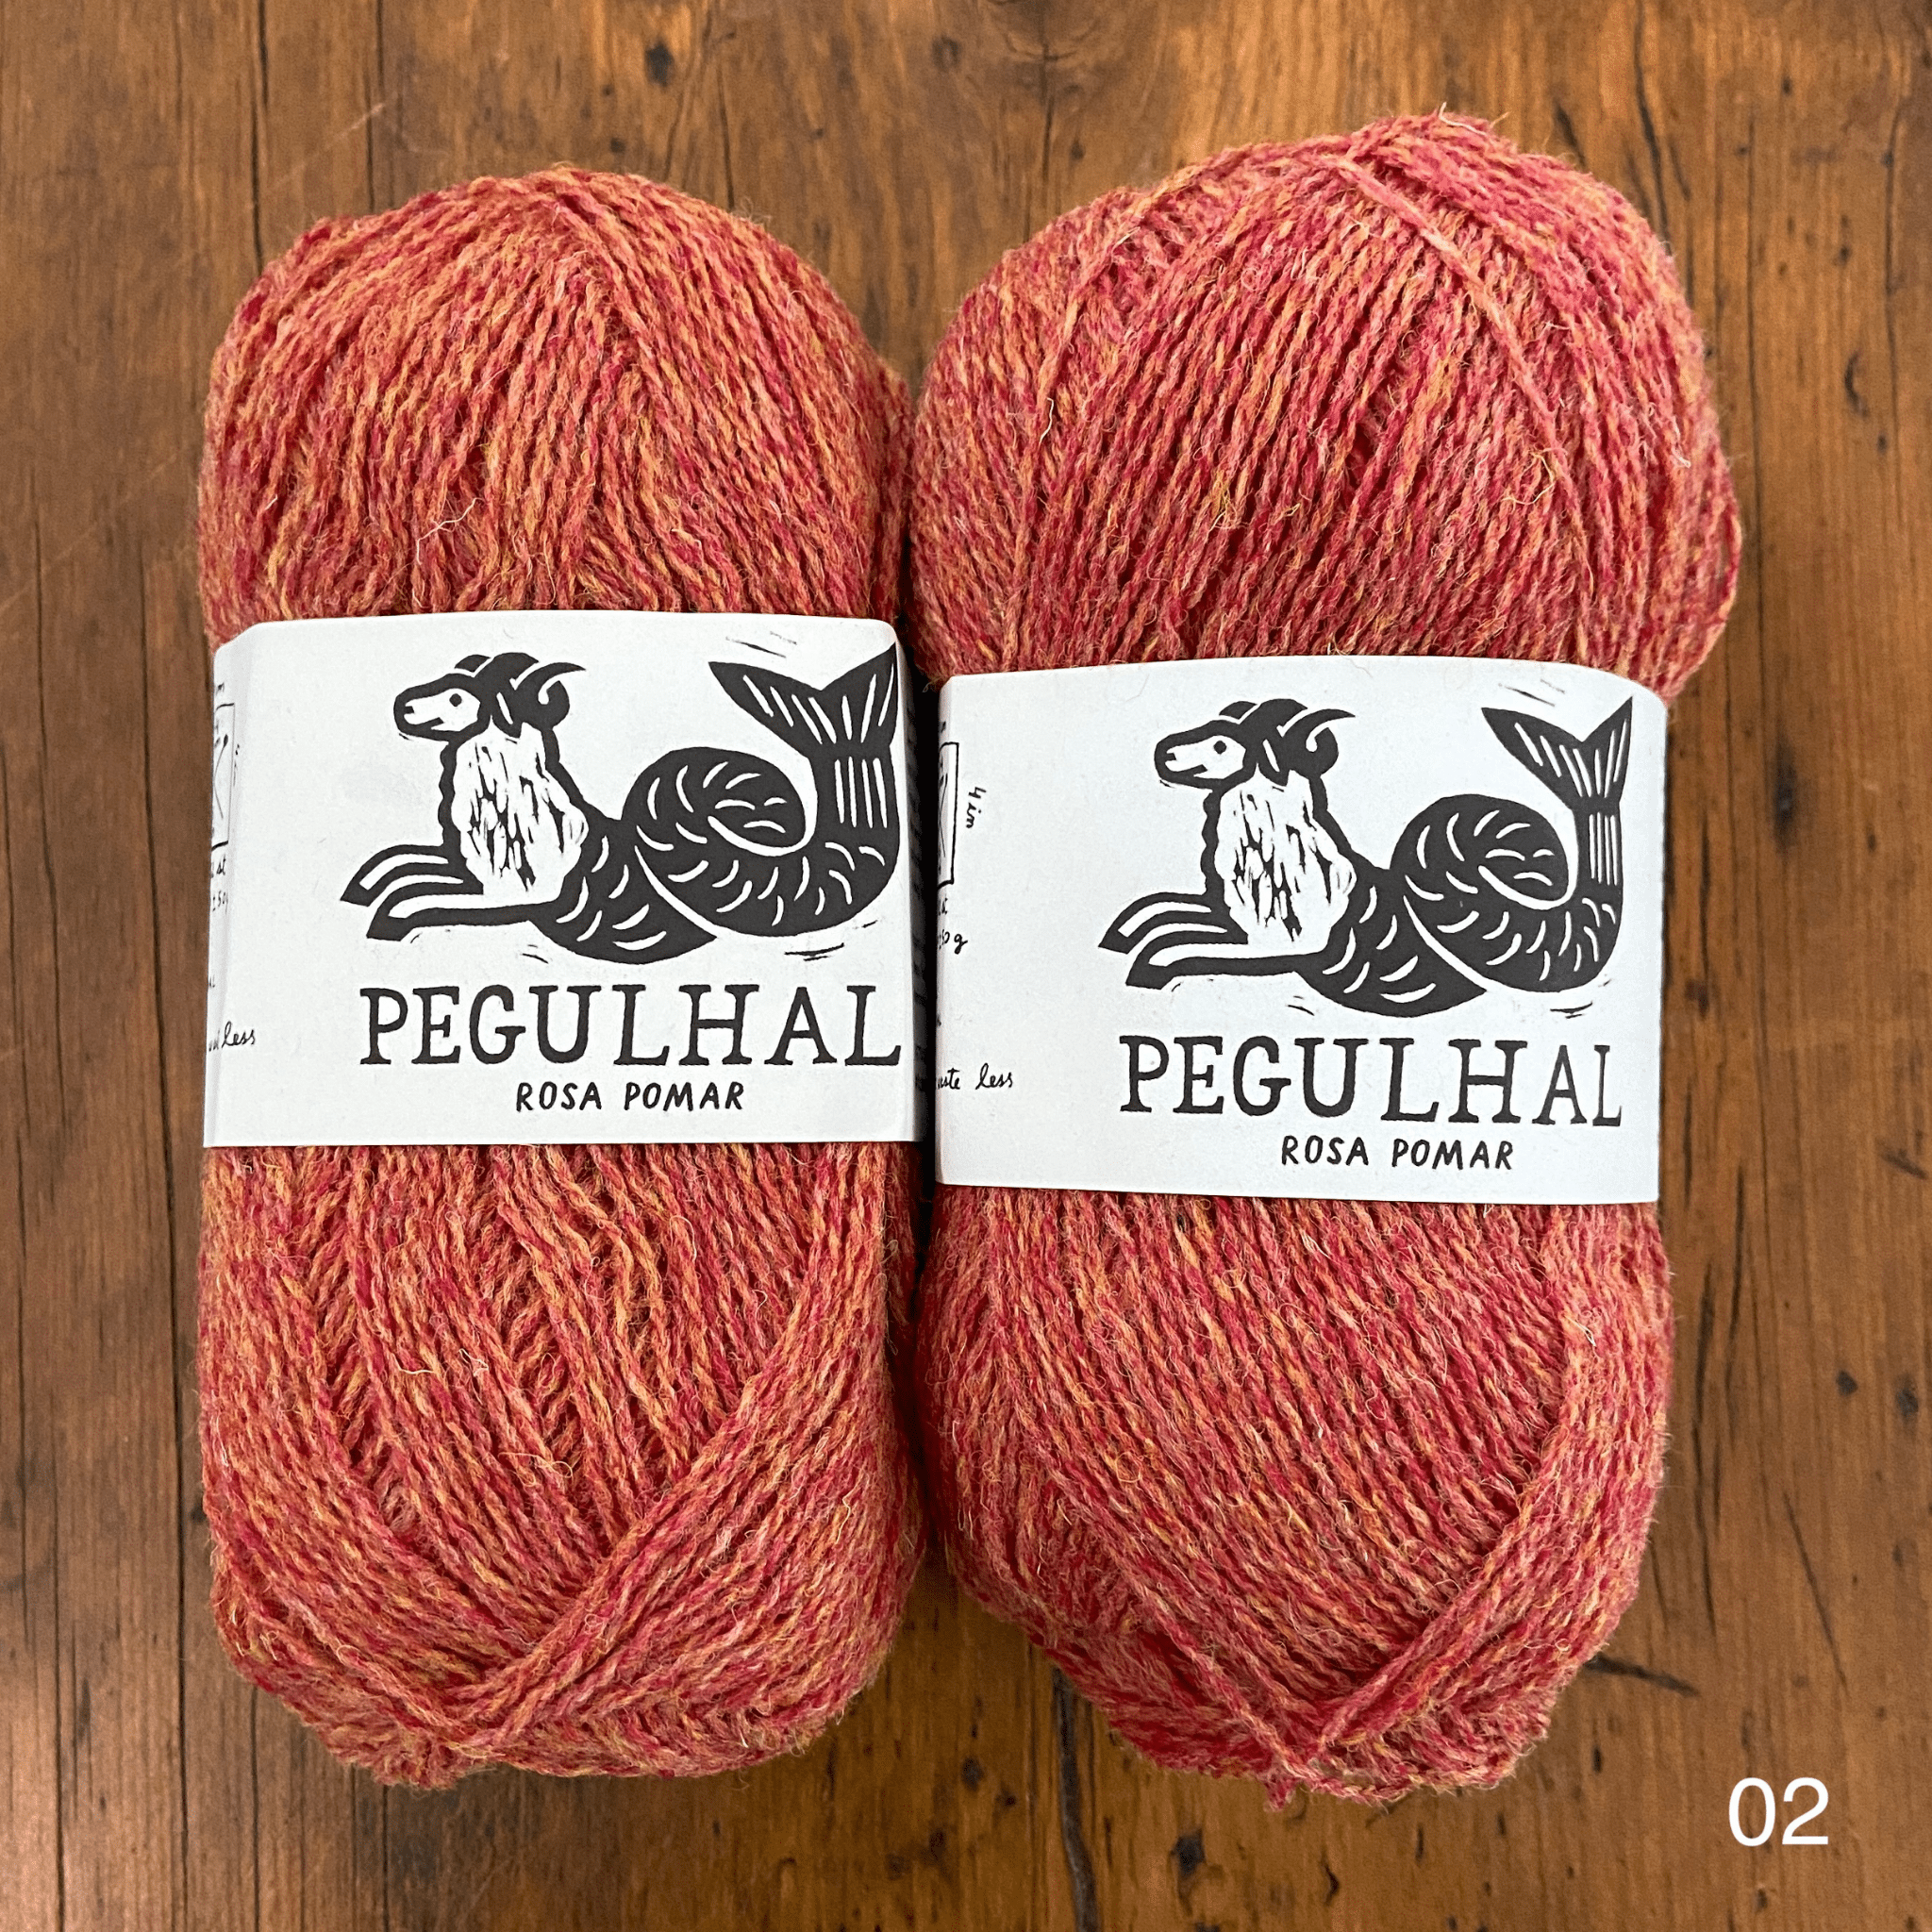 The Woolly Thistle's Retrosaria Pegulhal Fingering Weight Yarn in 02 (salmon)